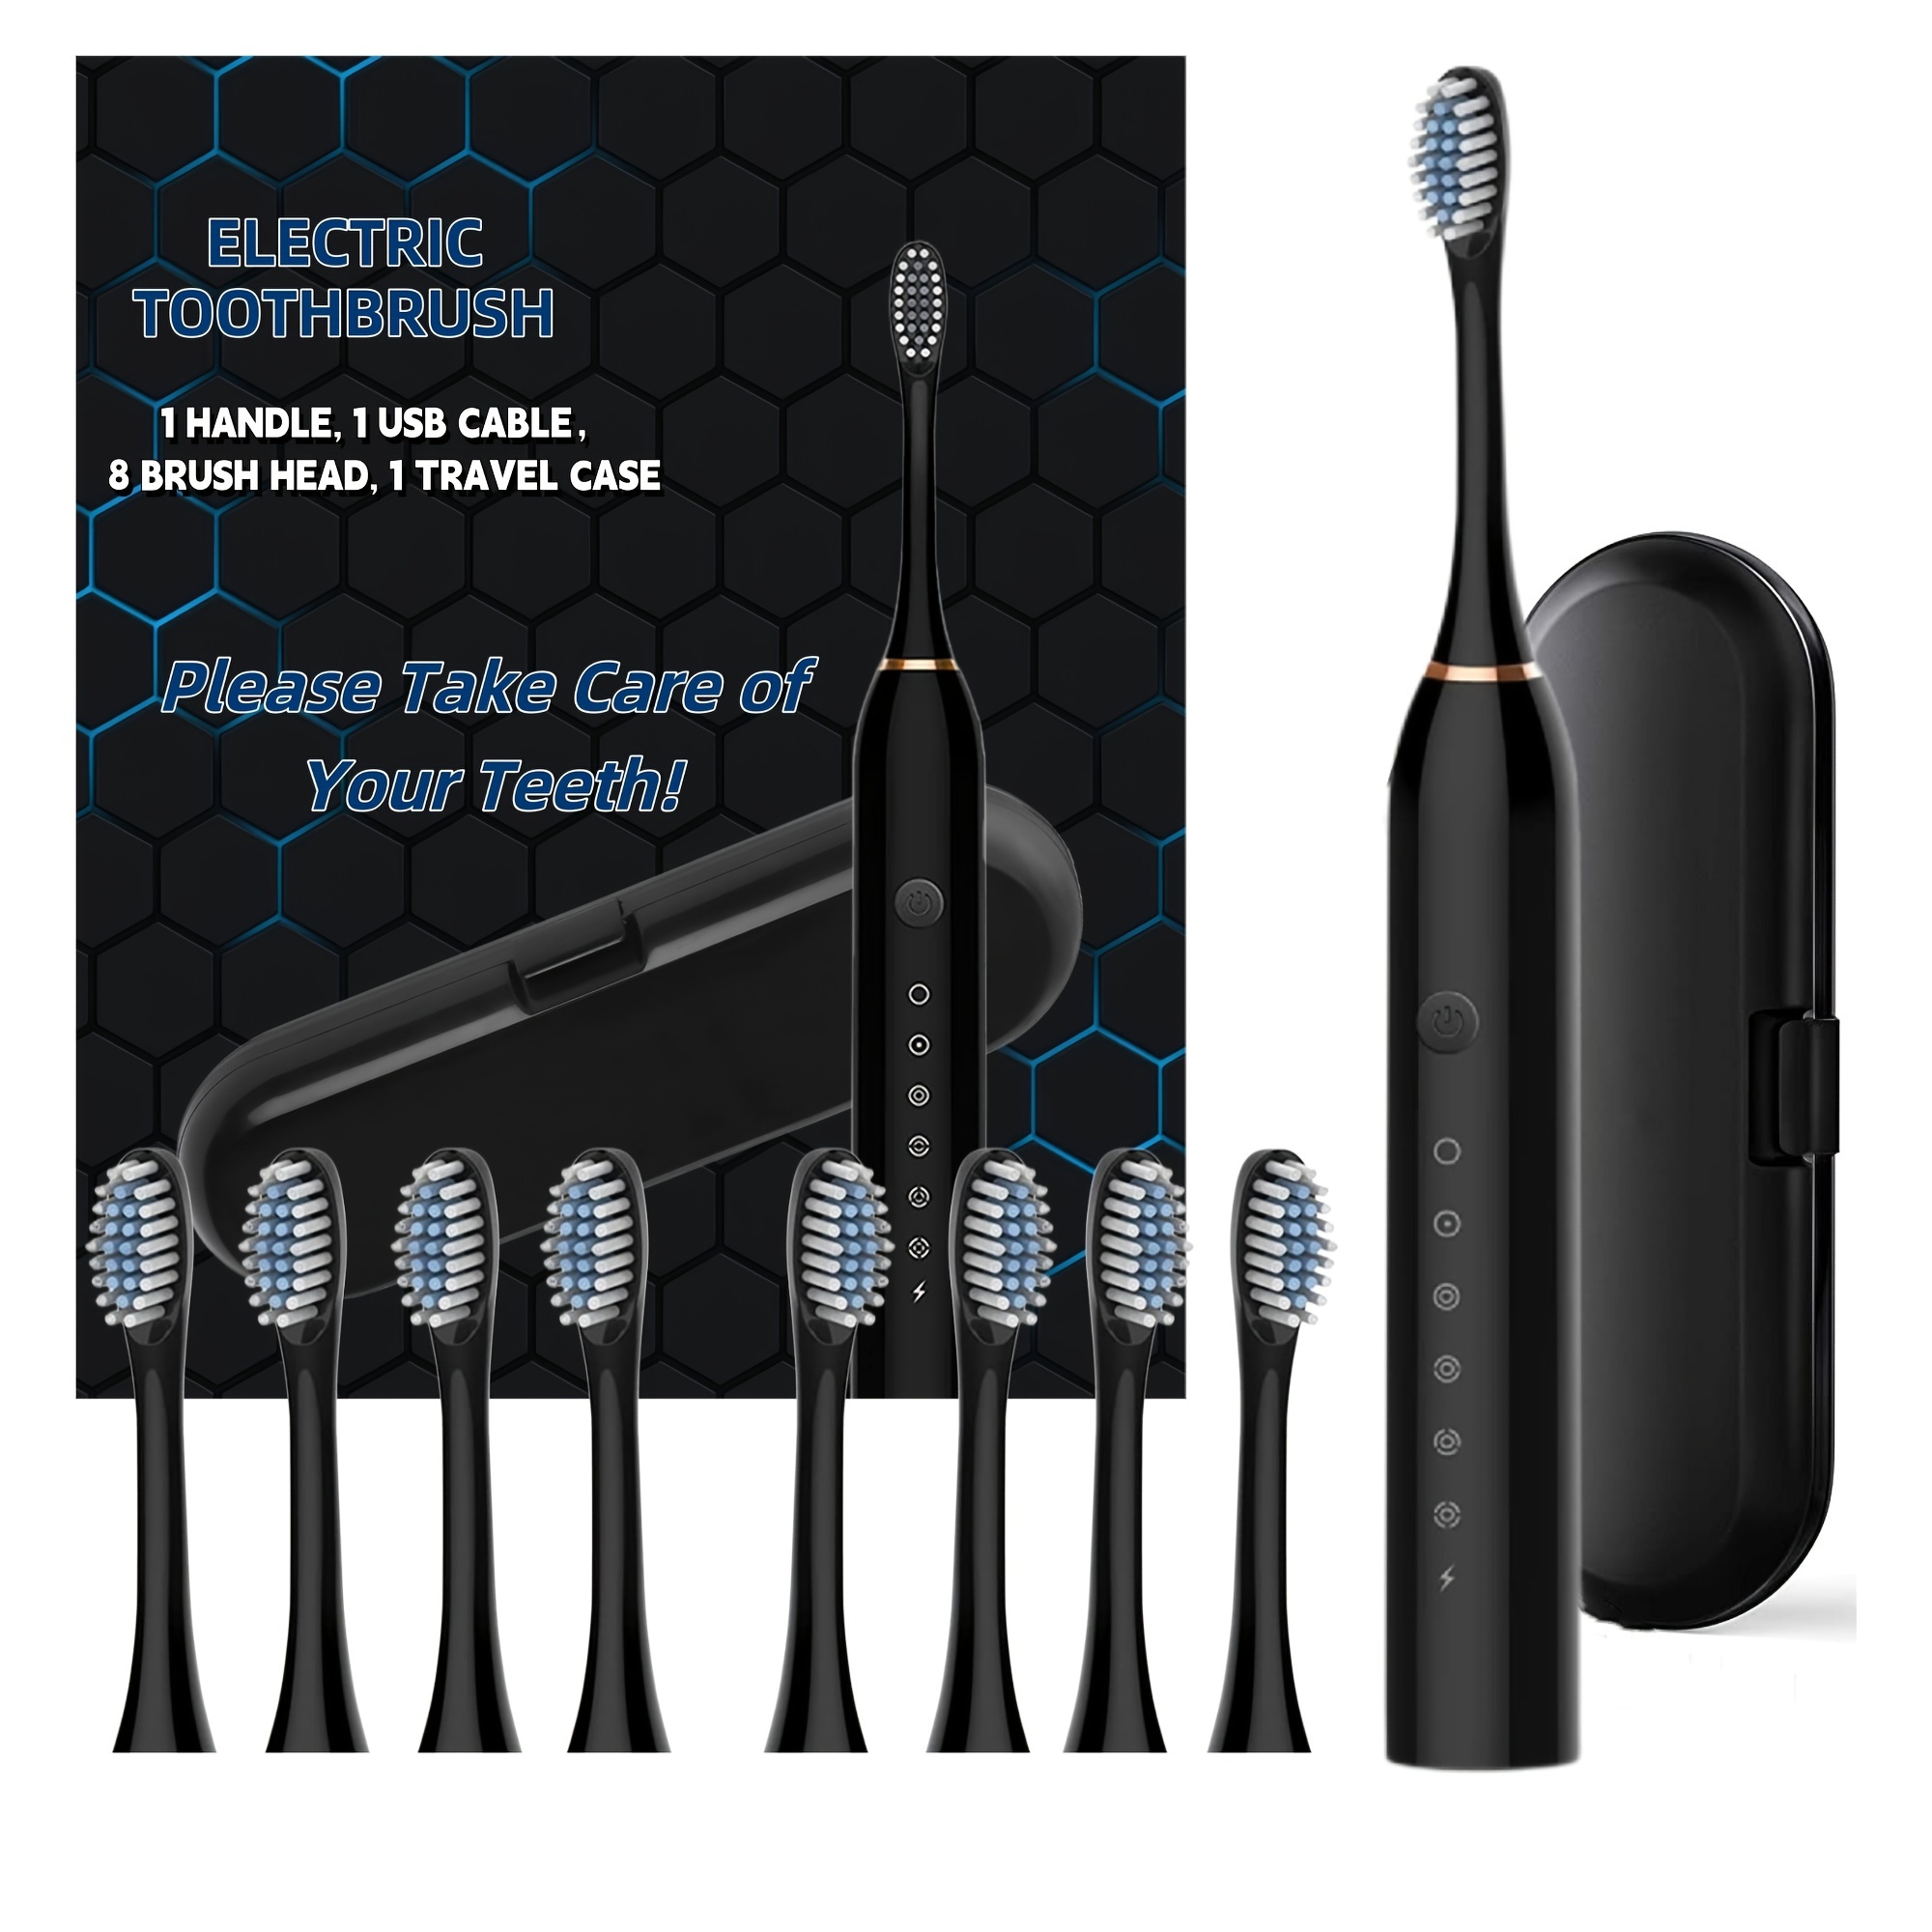 

Black Series Ultra Toothbrush - 8 Brush Heads & Usb Rechargeable Tooth Brush - Black Travel Case & 6 Modes W Smart Time - Effective Teeth And Gum Cleaning For Men And Women